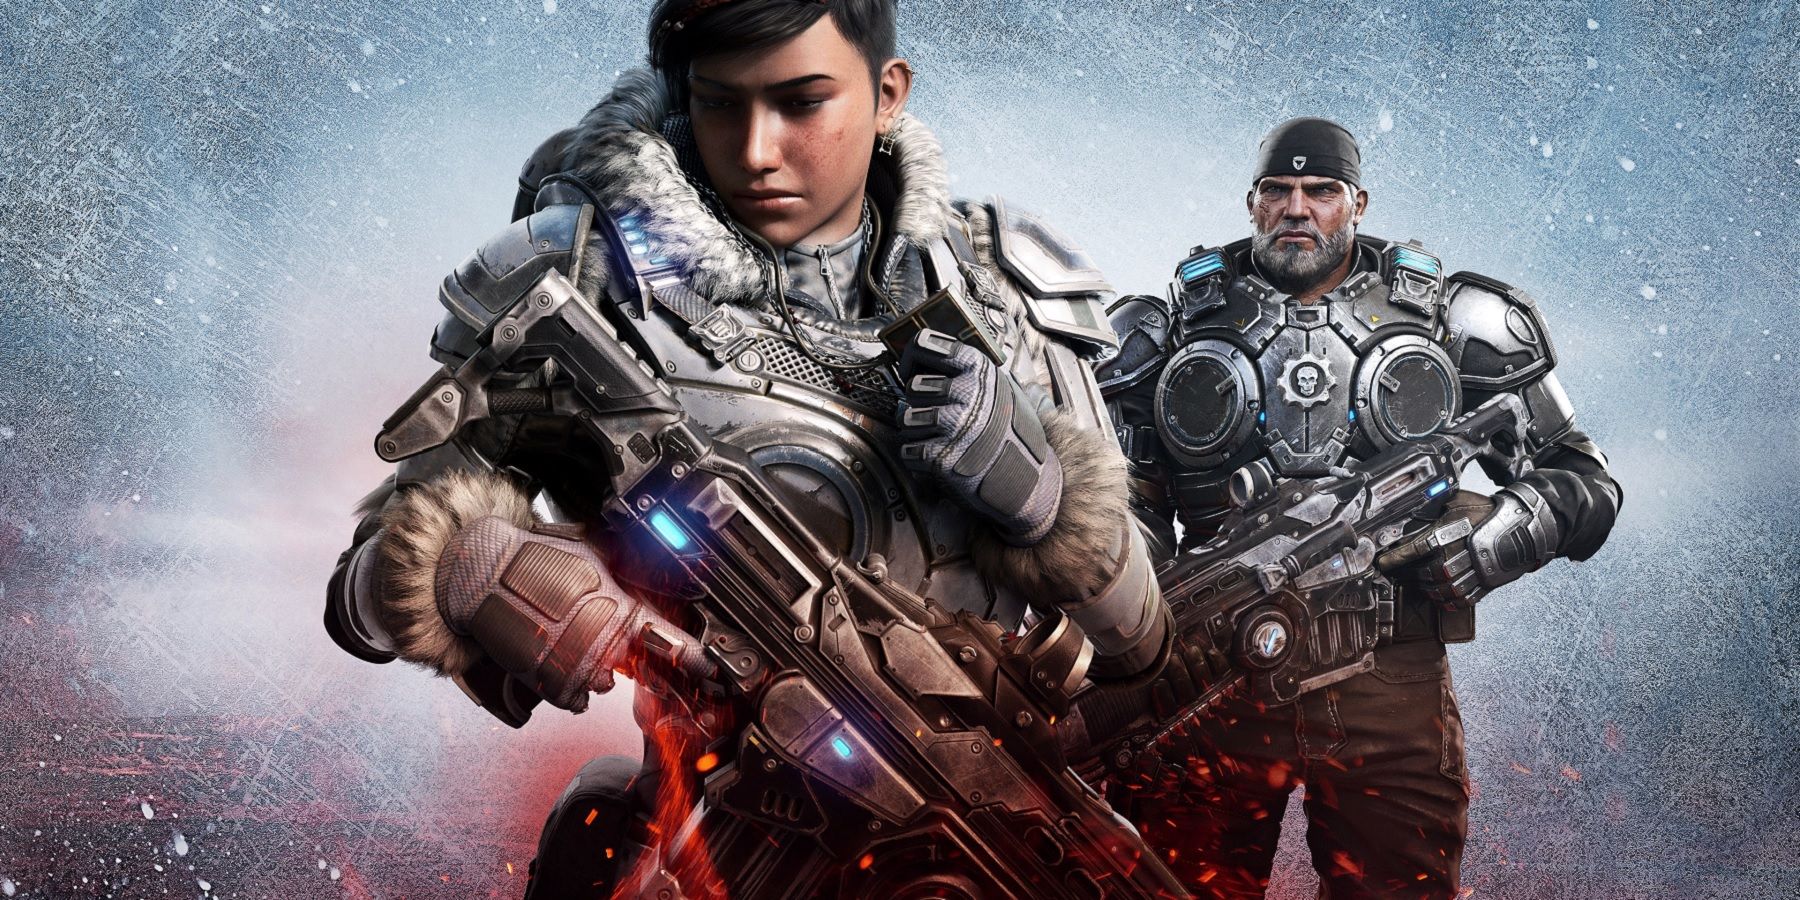 Gears 5' update aims to completely relaunch multiplayer